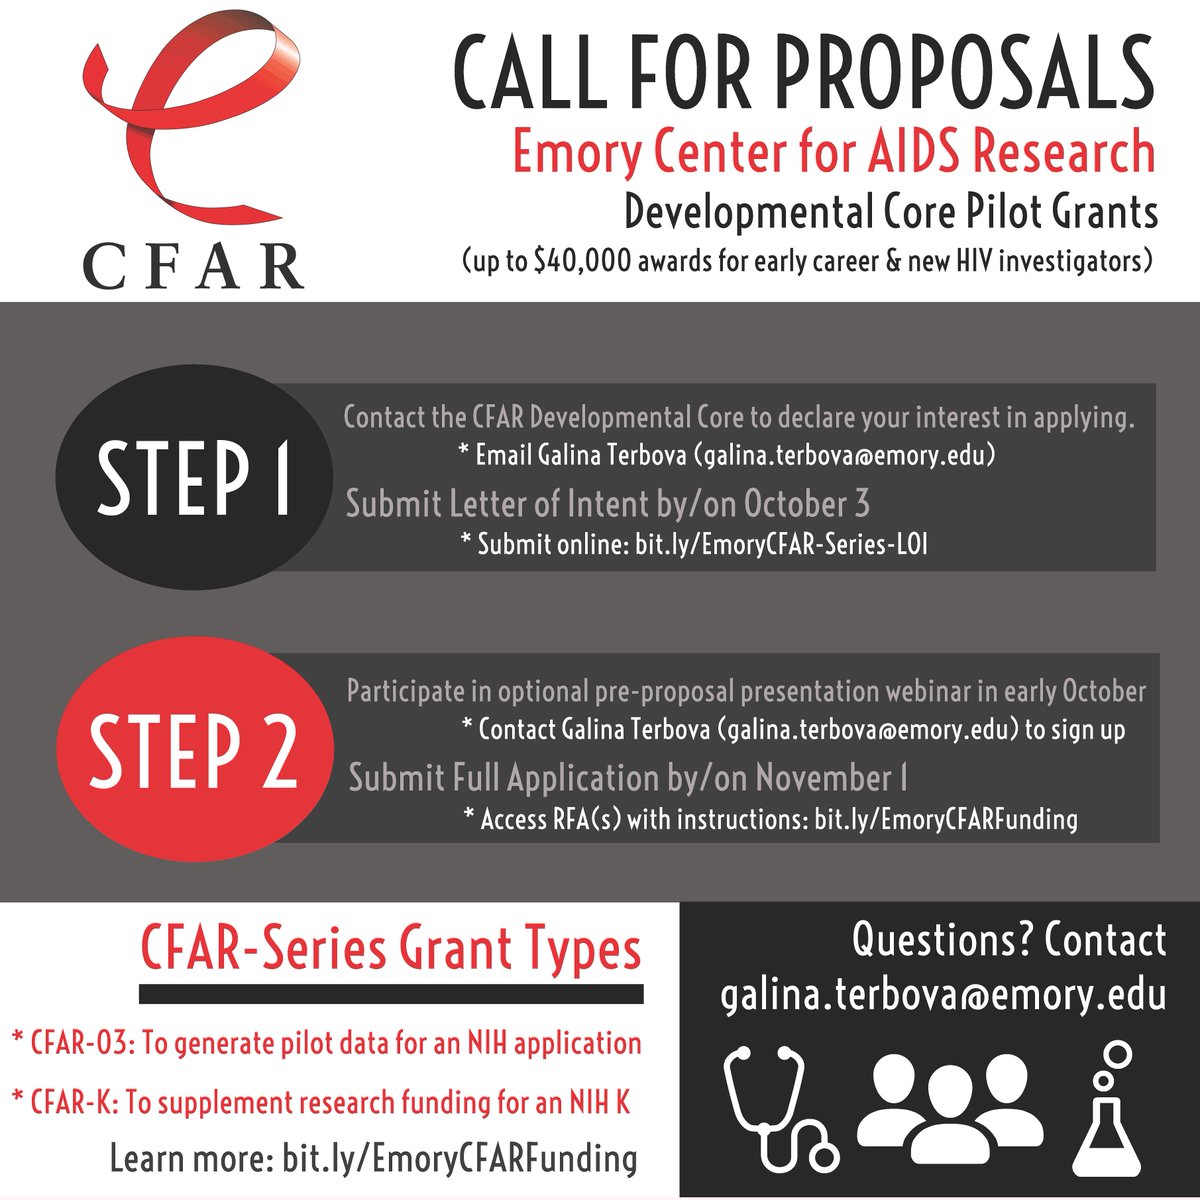 Call for proposals for the CFAR-Series Mentored Pilot Grant Program!! Apply for up to $40K for a one-year research project that aims to advance #HIV prevention, treatment, care and/or cure strategies. LOIs due 10/3. Learn more & read the full RFAs: bit.ly/EmoryCFARFundi…